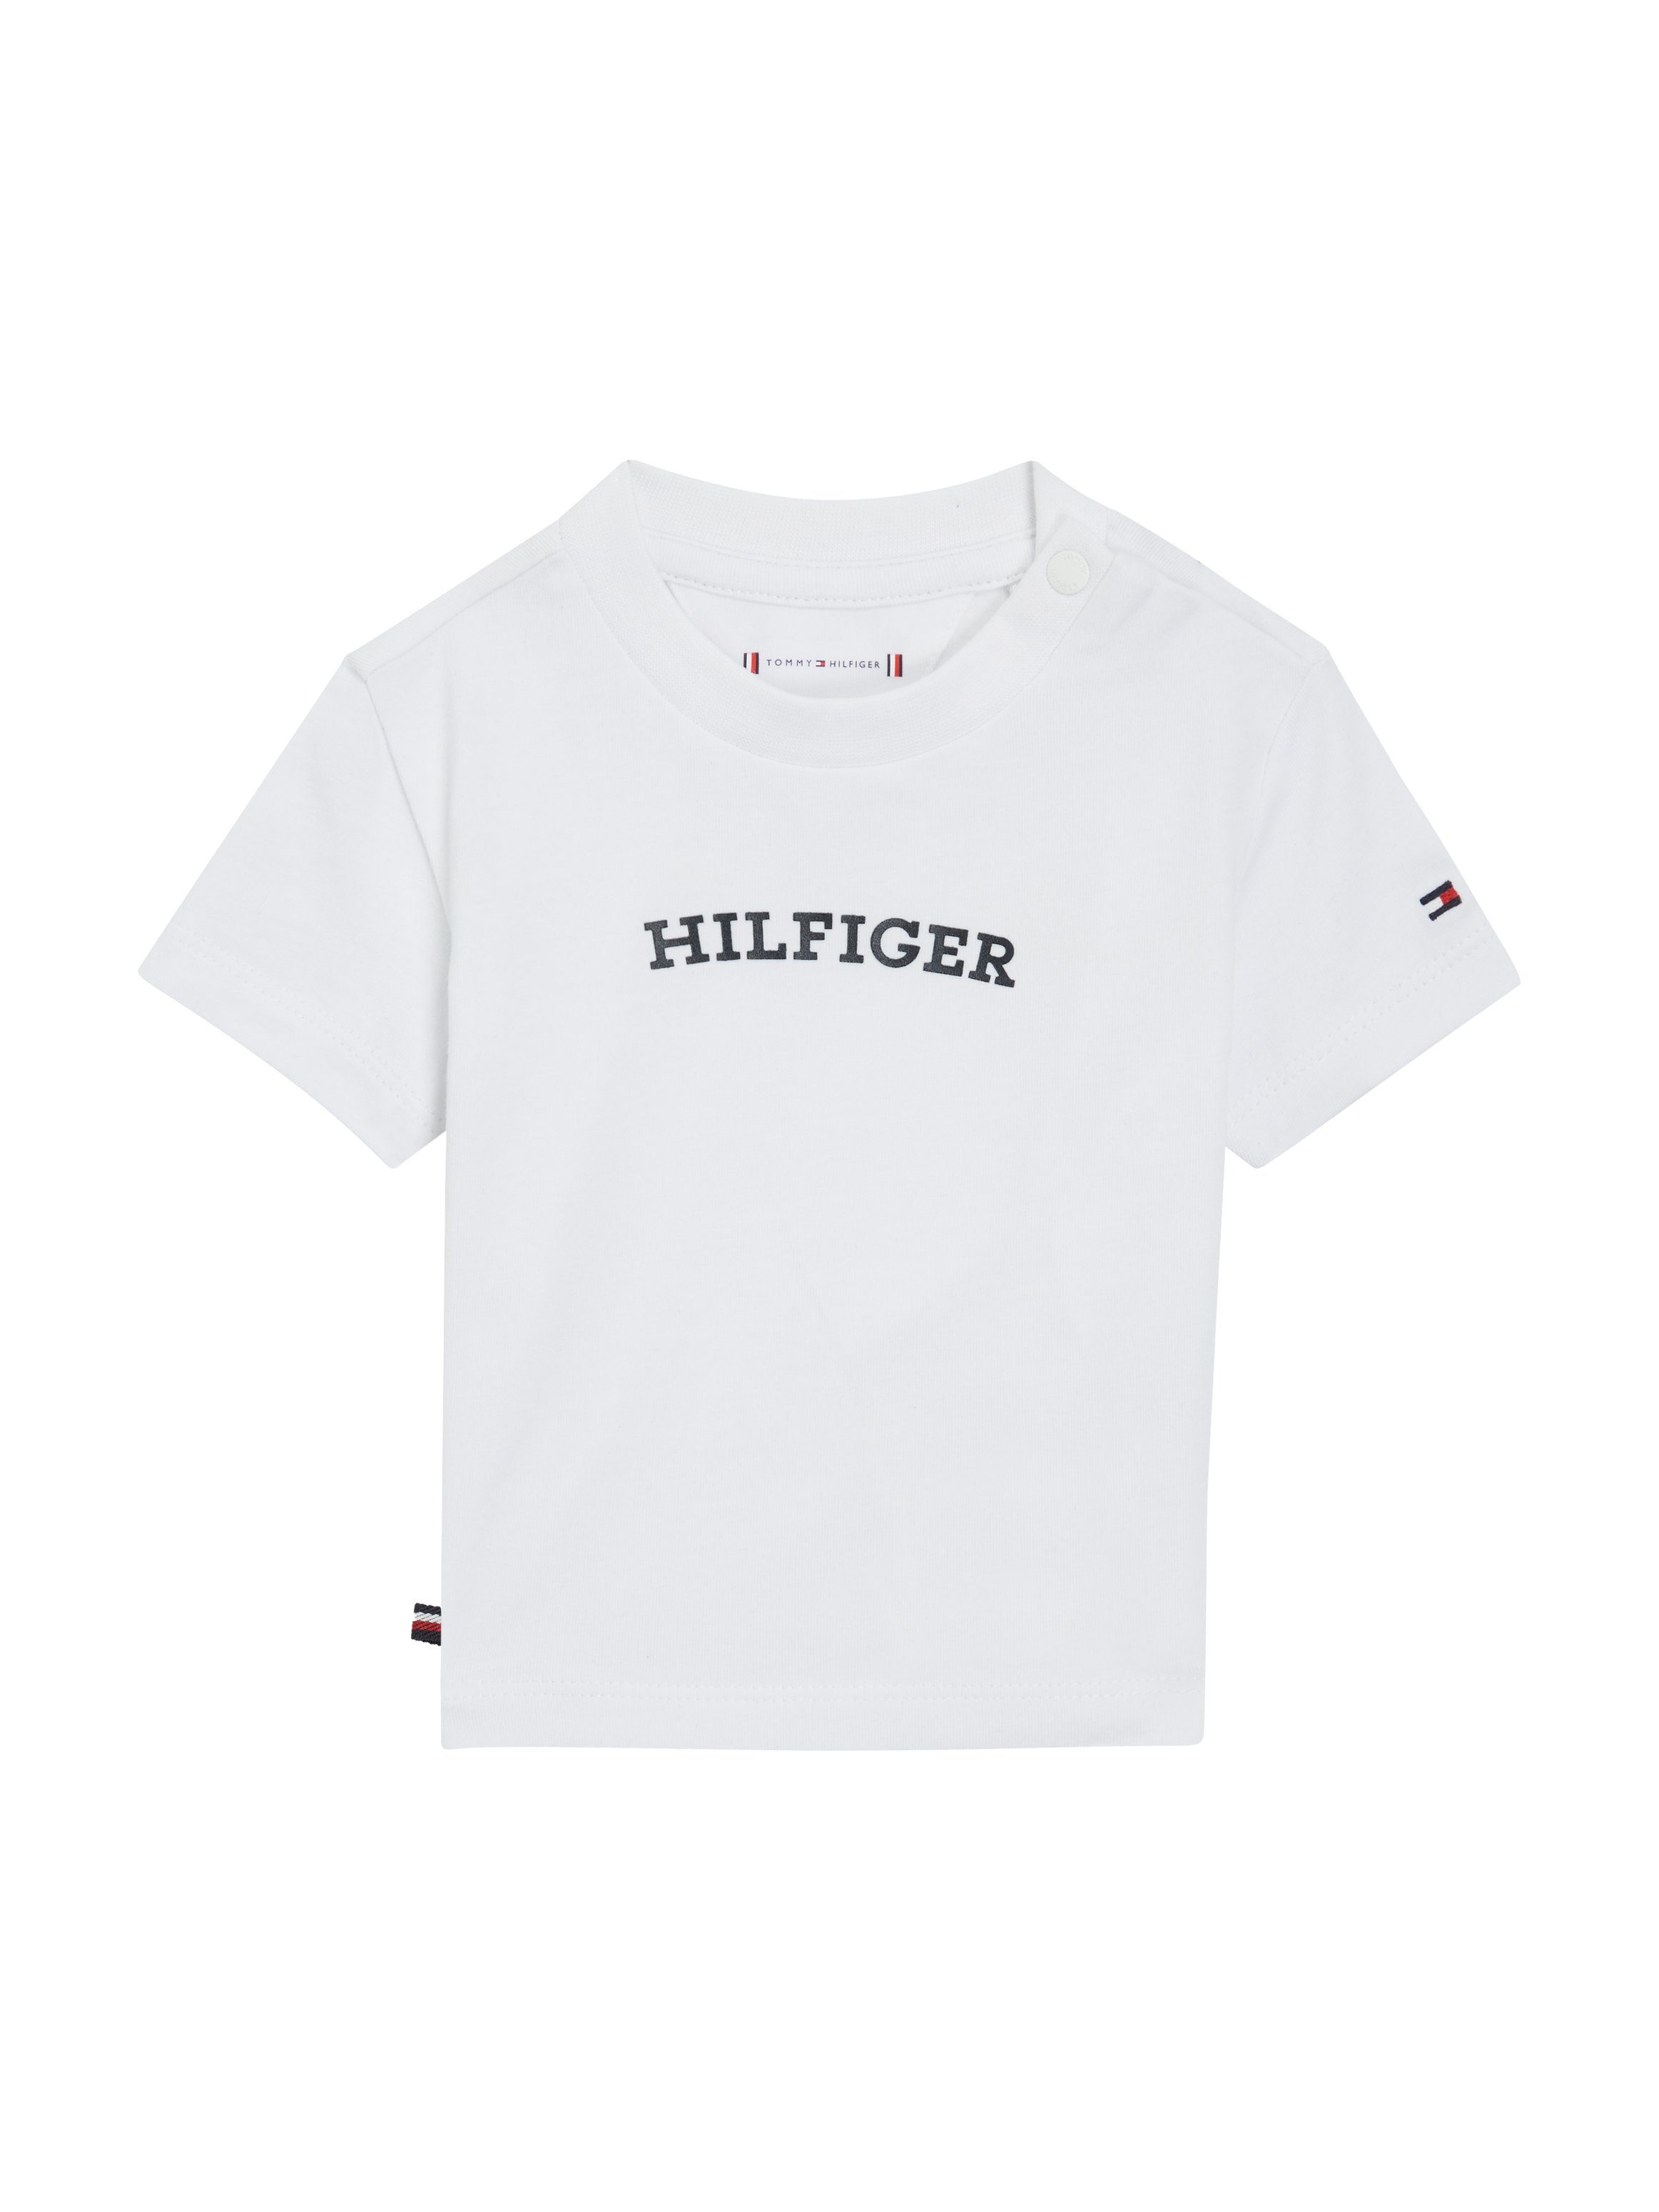 Tommy Hilfiger T-Shirt BABY CURVED MONOTYPE TEE S/S mit großem Hilfiger Front Print & Logo-Flag White